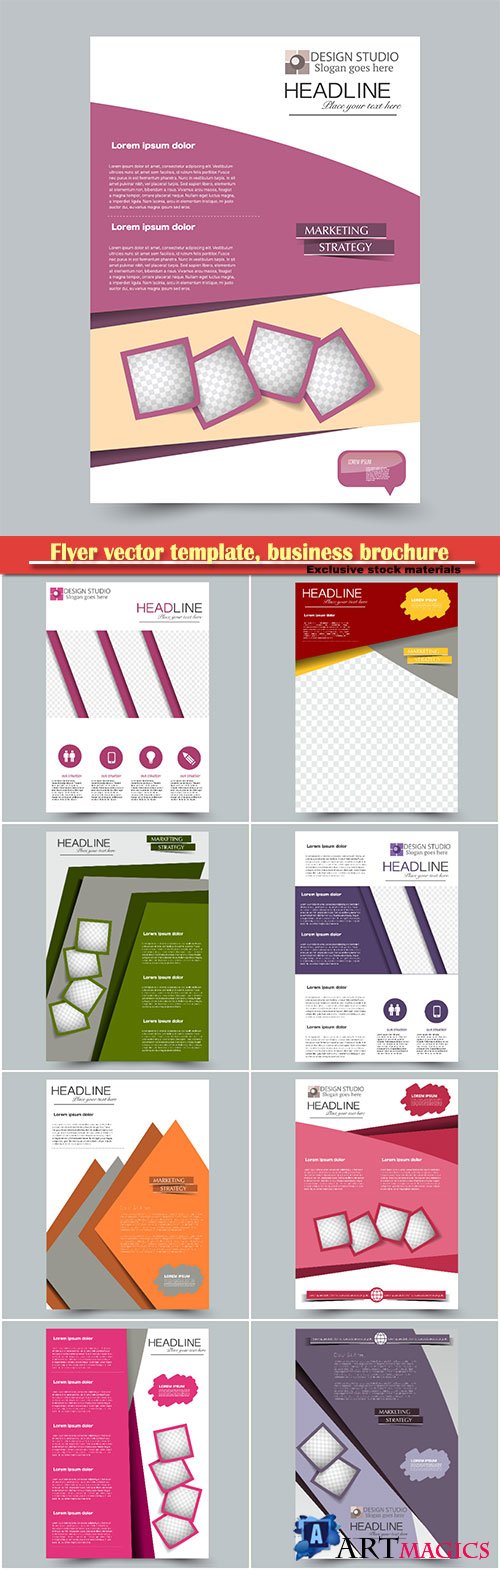 Flyer vector template, business brochure, magazine cover # 37